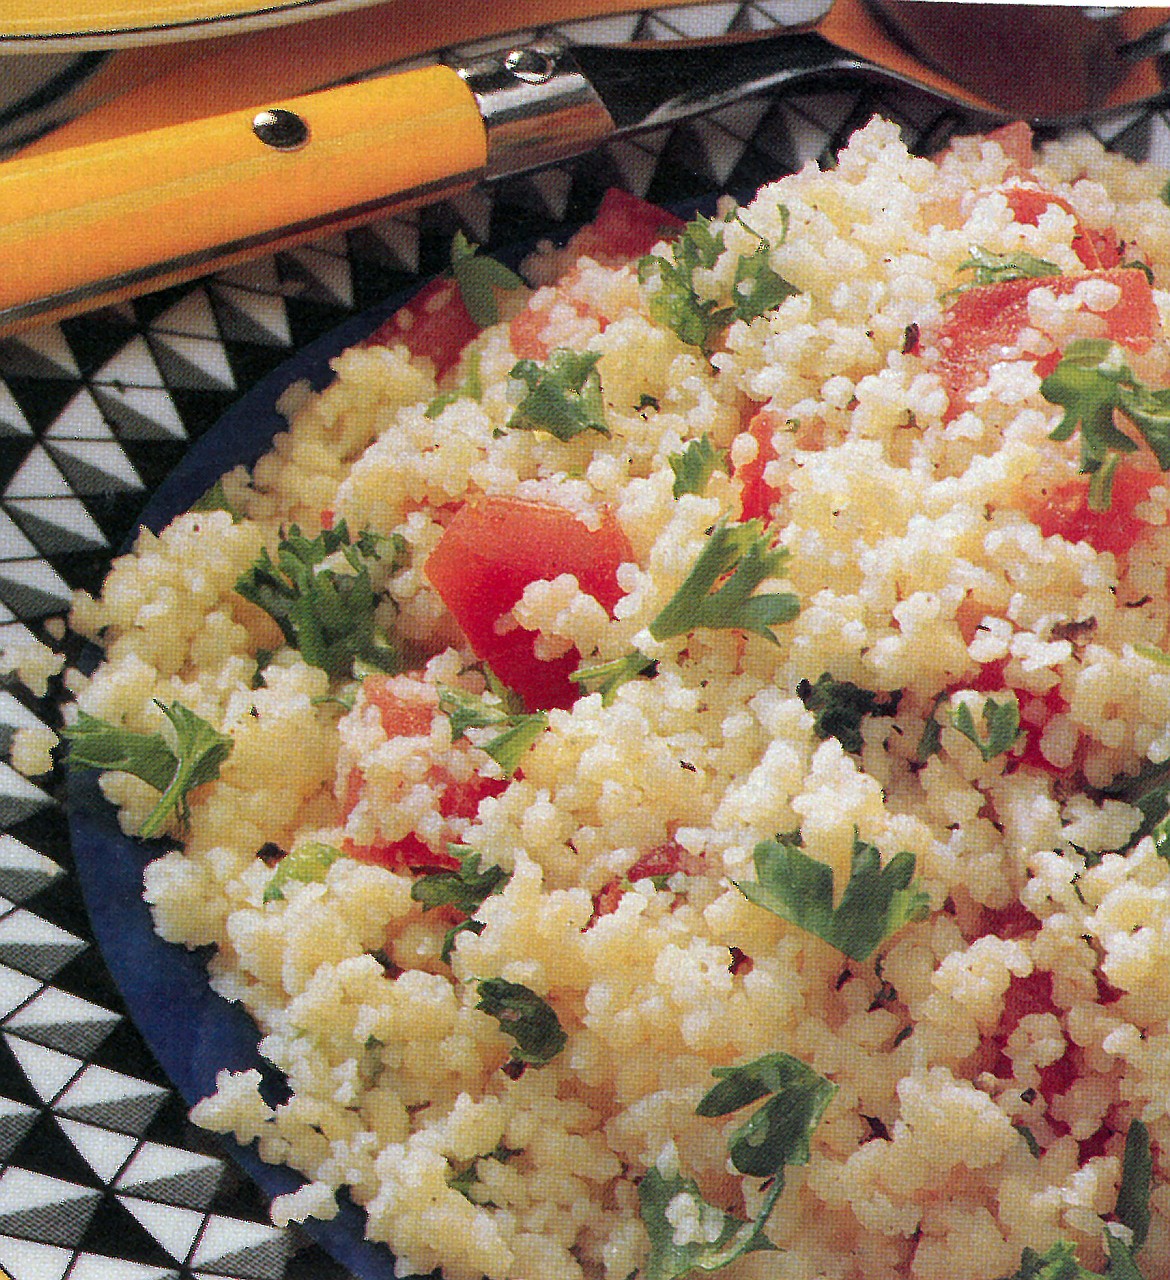 Couscous can adapt to cold-weather fare by a variety of possibilities.